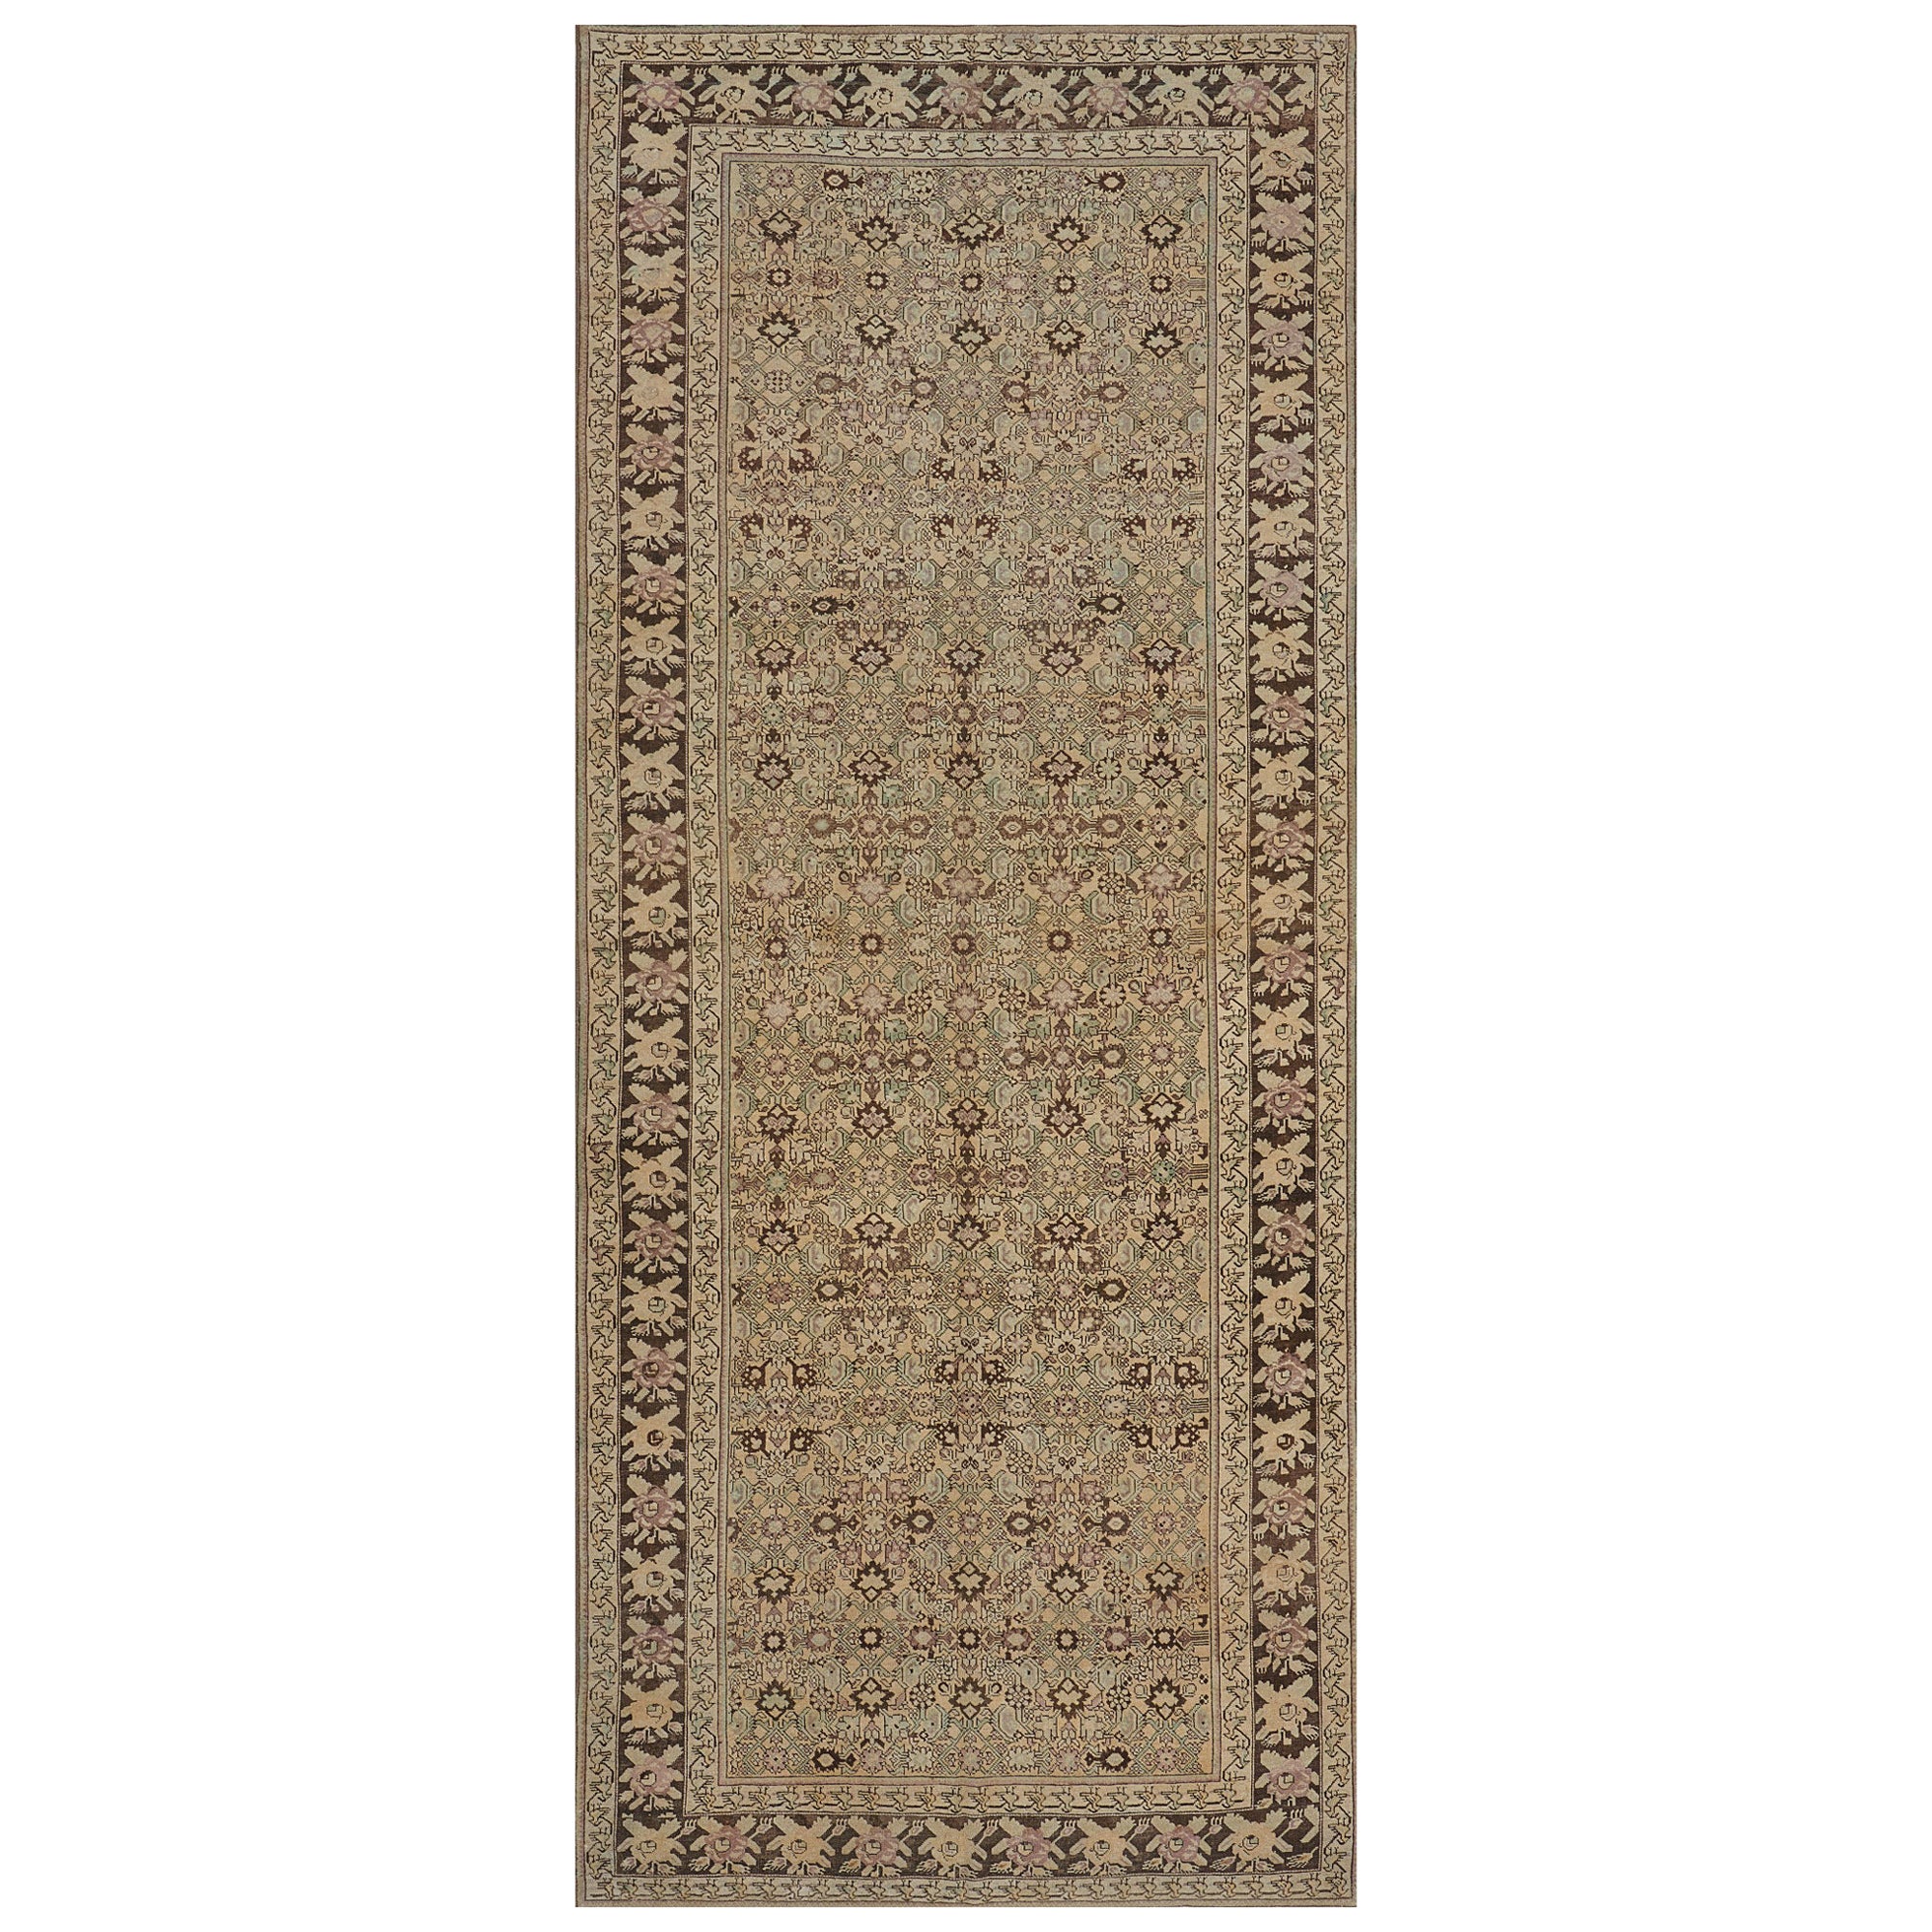 Hand-Knotted Antique Wool Caucasian Karabagh Rug